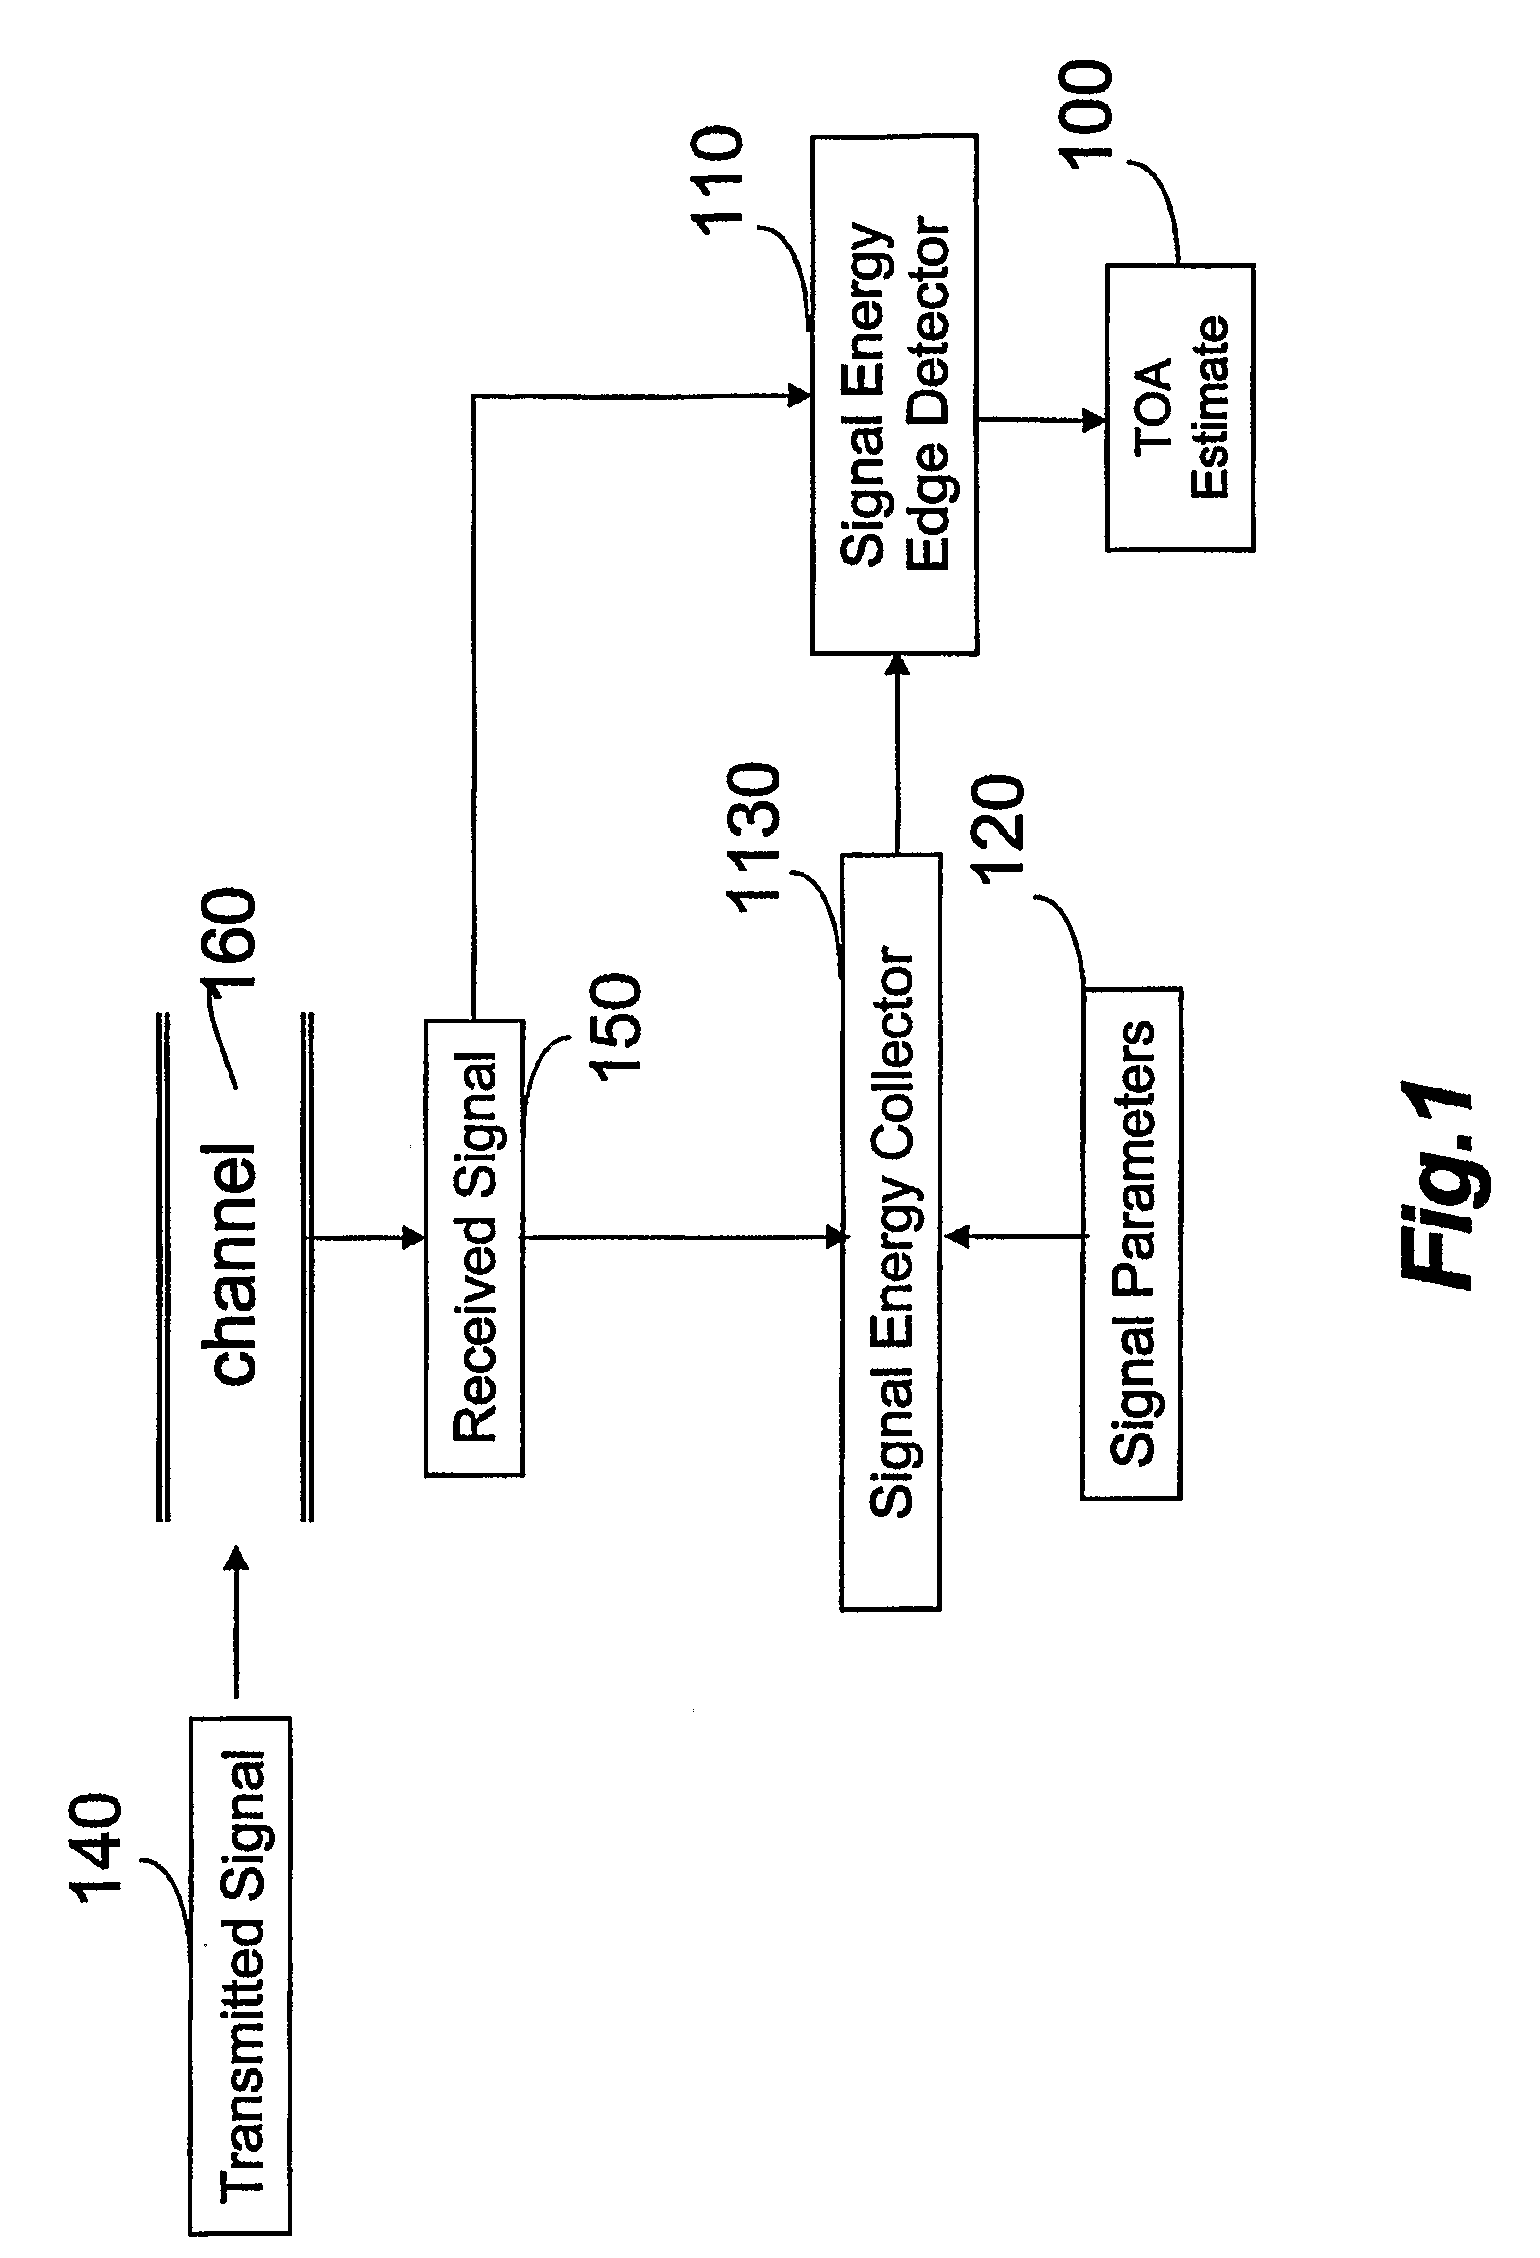 Method and Receiver for Identifying a Leading Edge Time Period in a Received Radio Signal